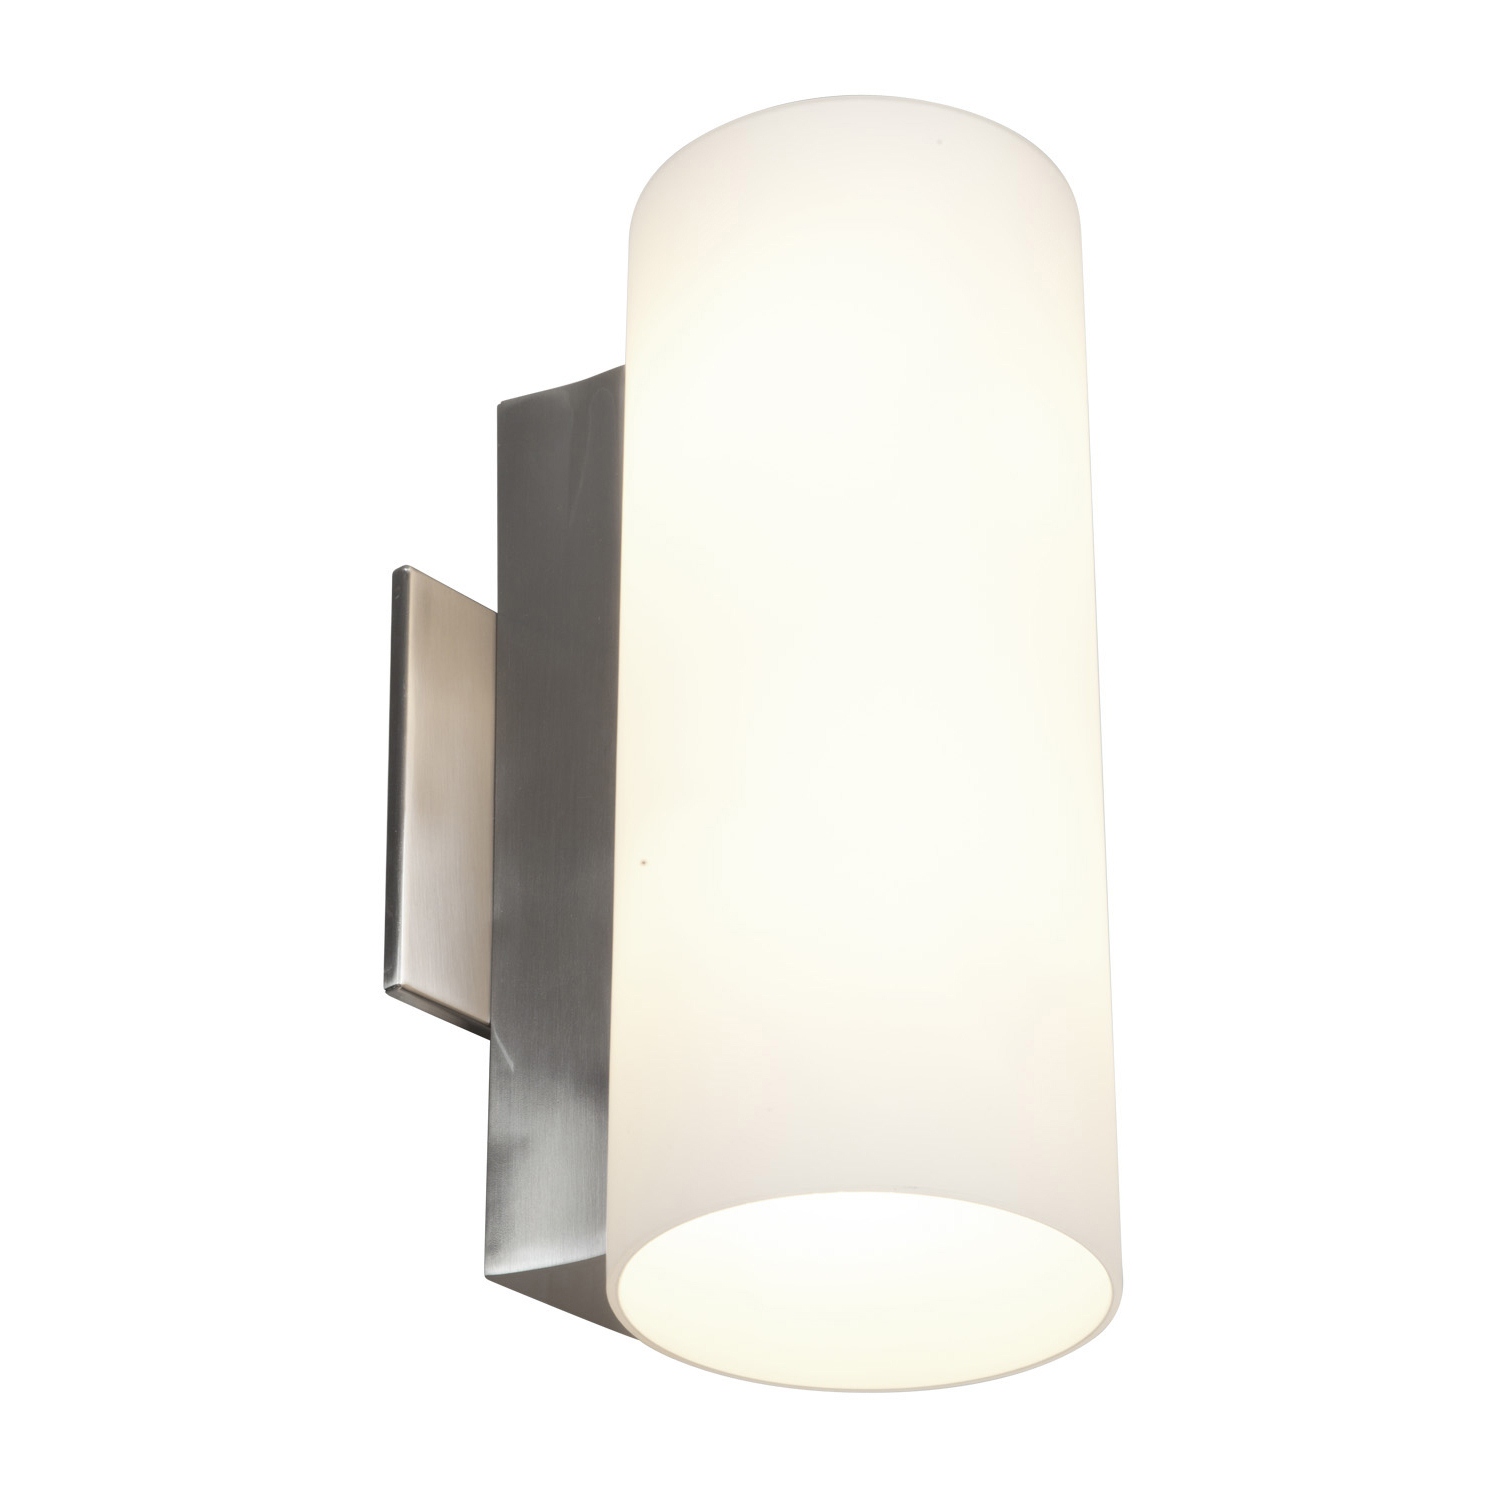 Modern wall light fixtures - 16 tips for selecting the right wall